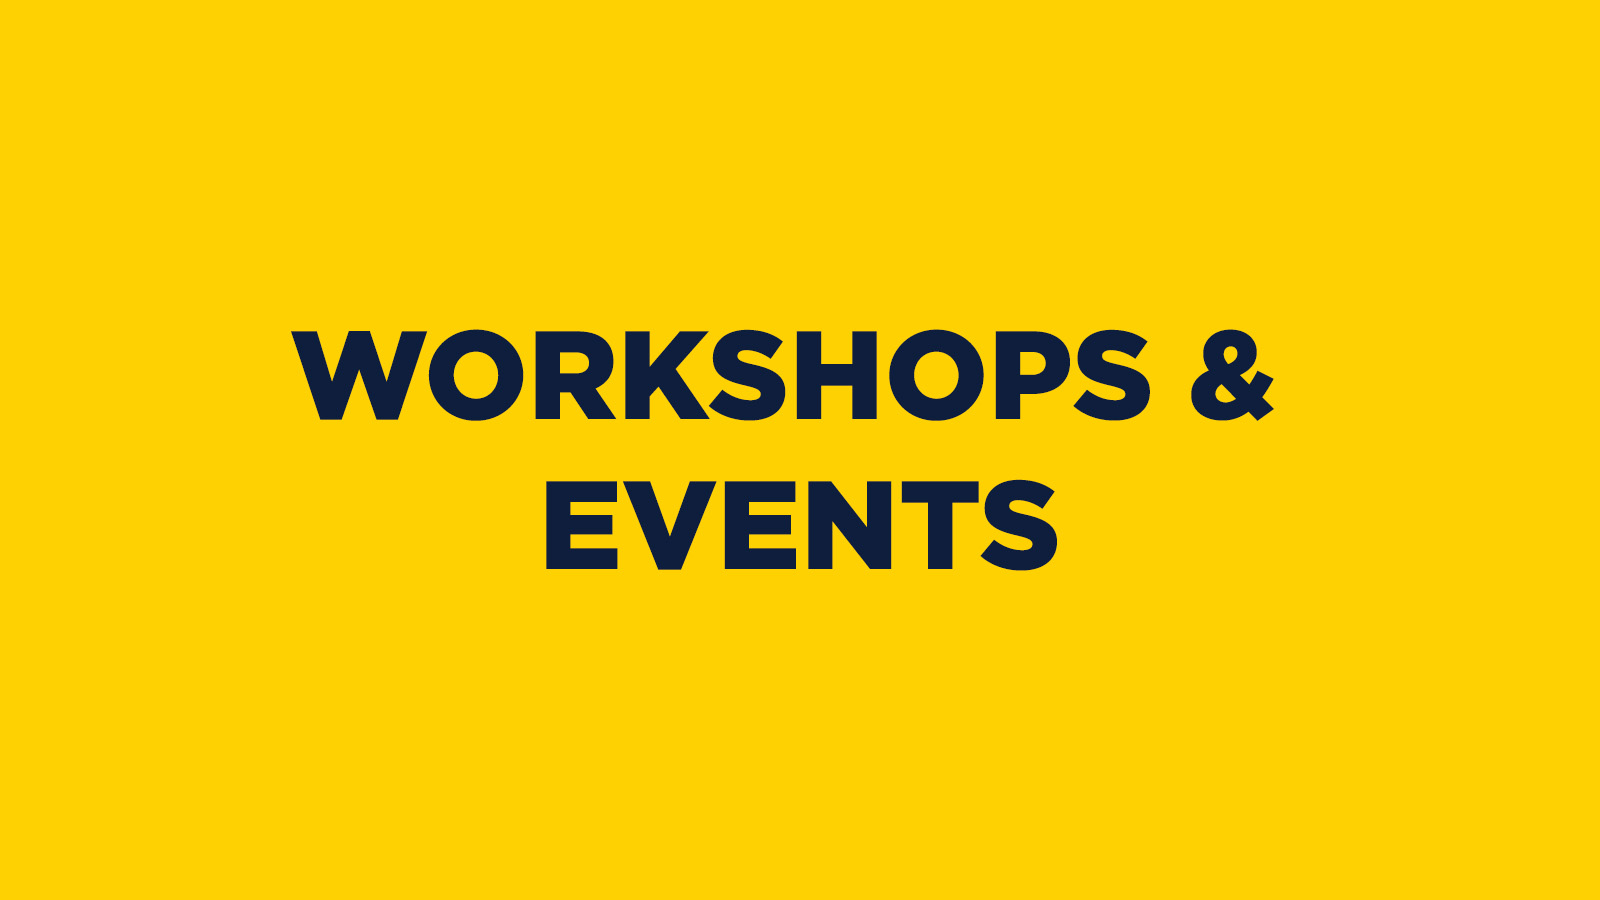 CTS WORKSHOPS & EVENTS